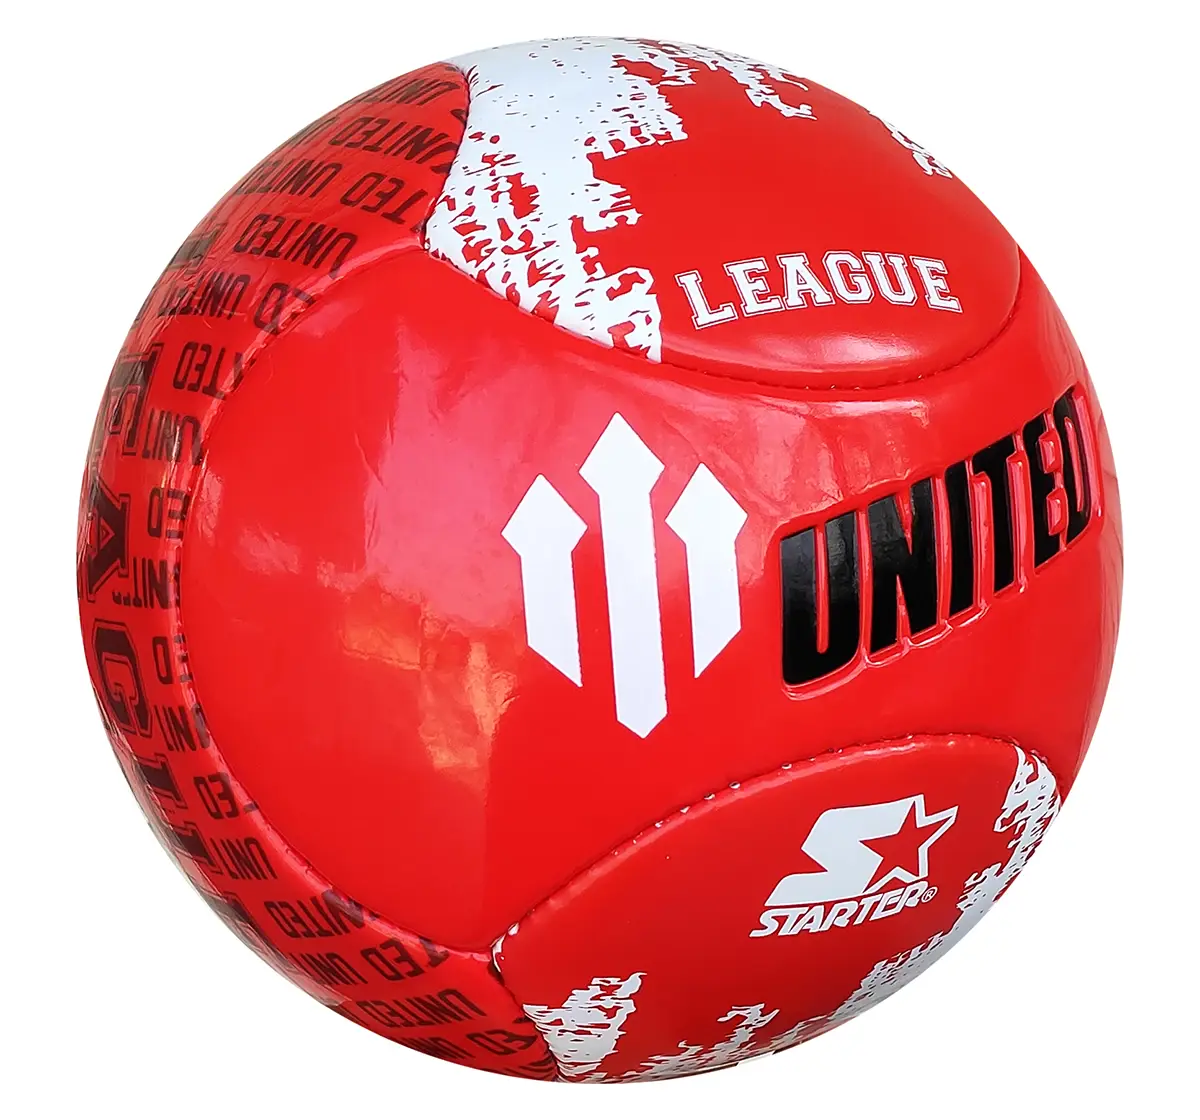 Starter Football Size 5 United Multicolor 8Y+